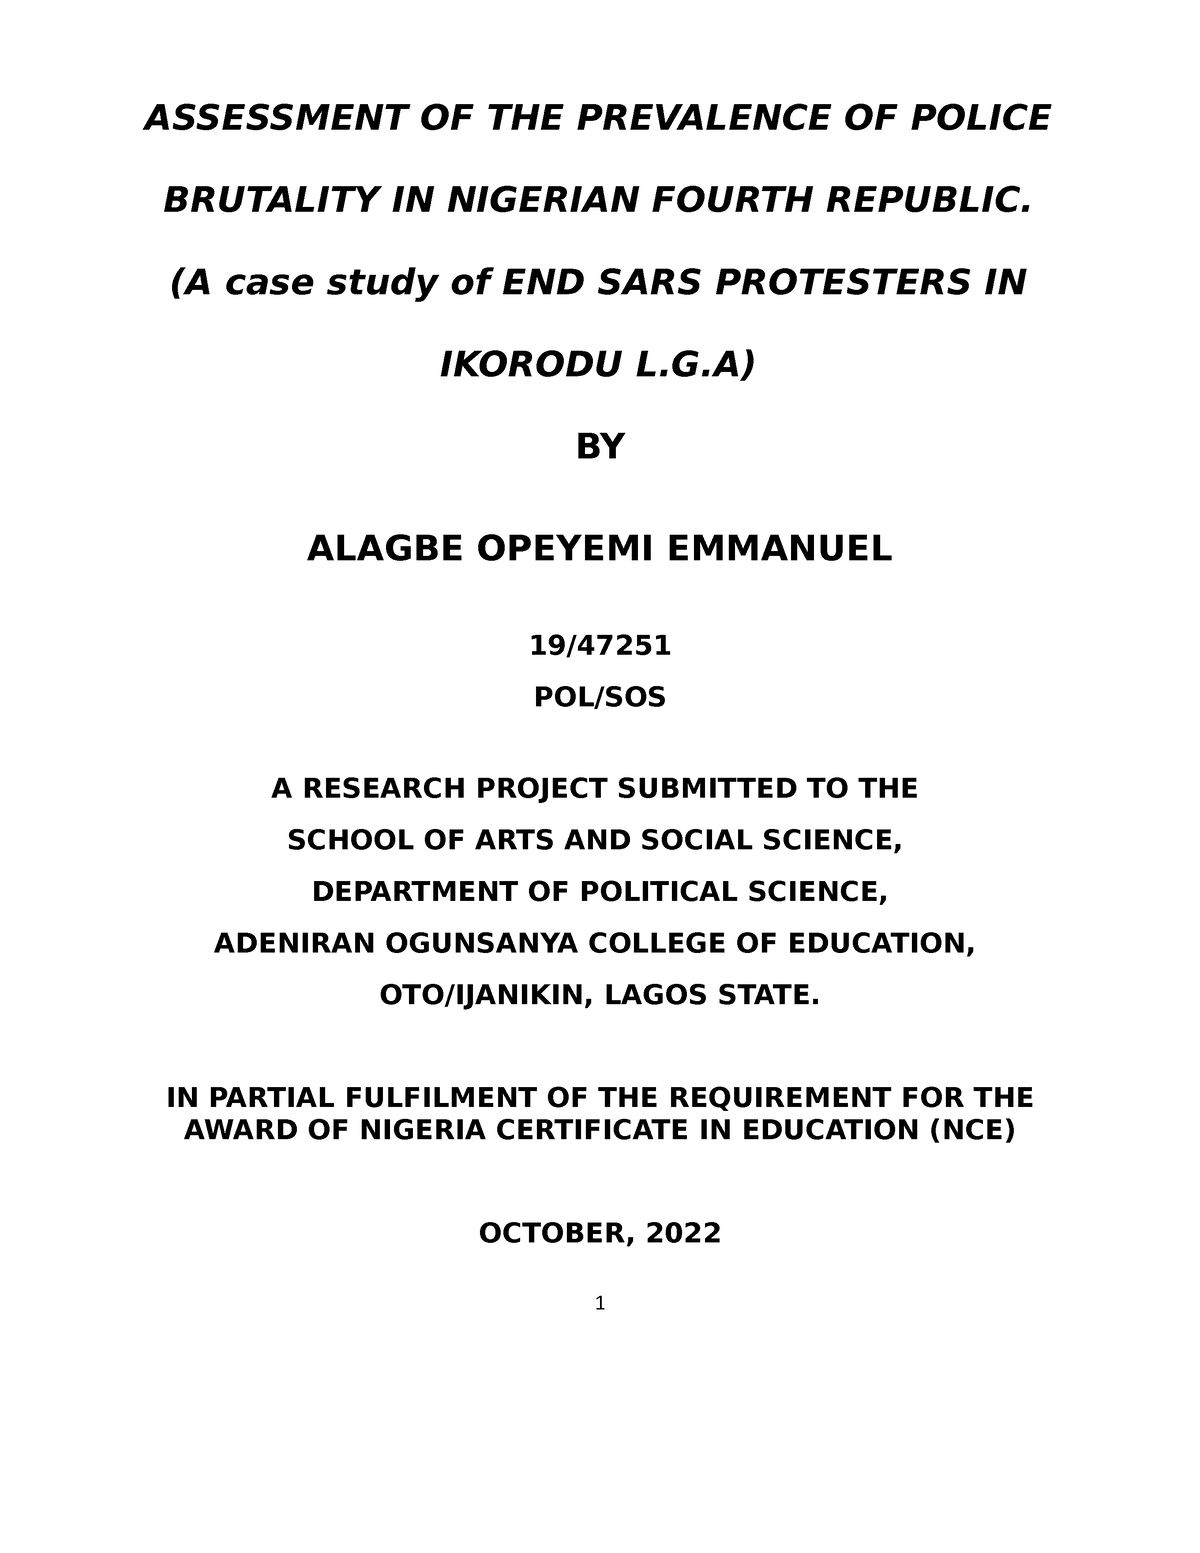 literature review on police brutality in nigeria